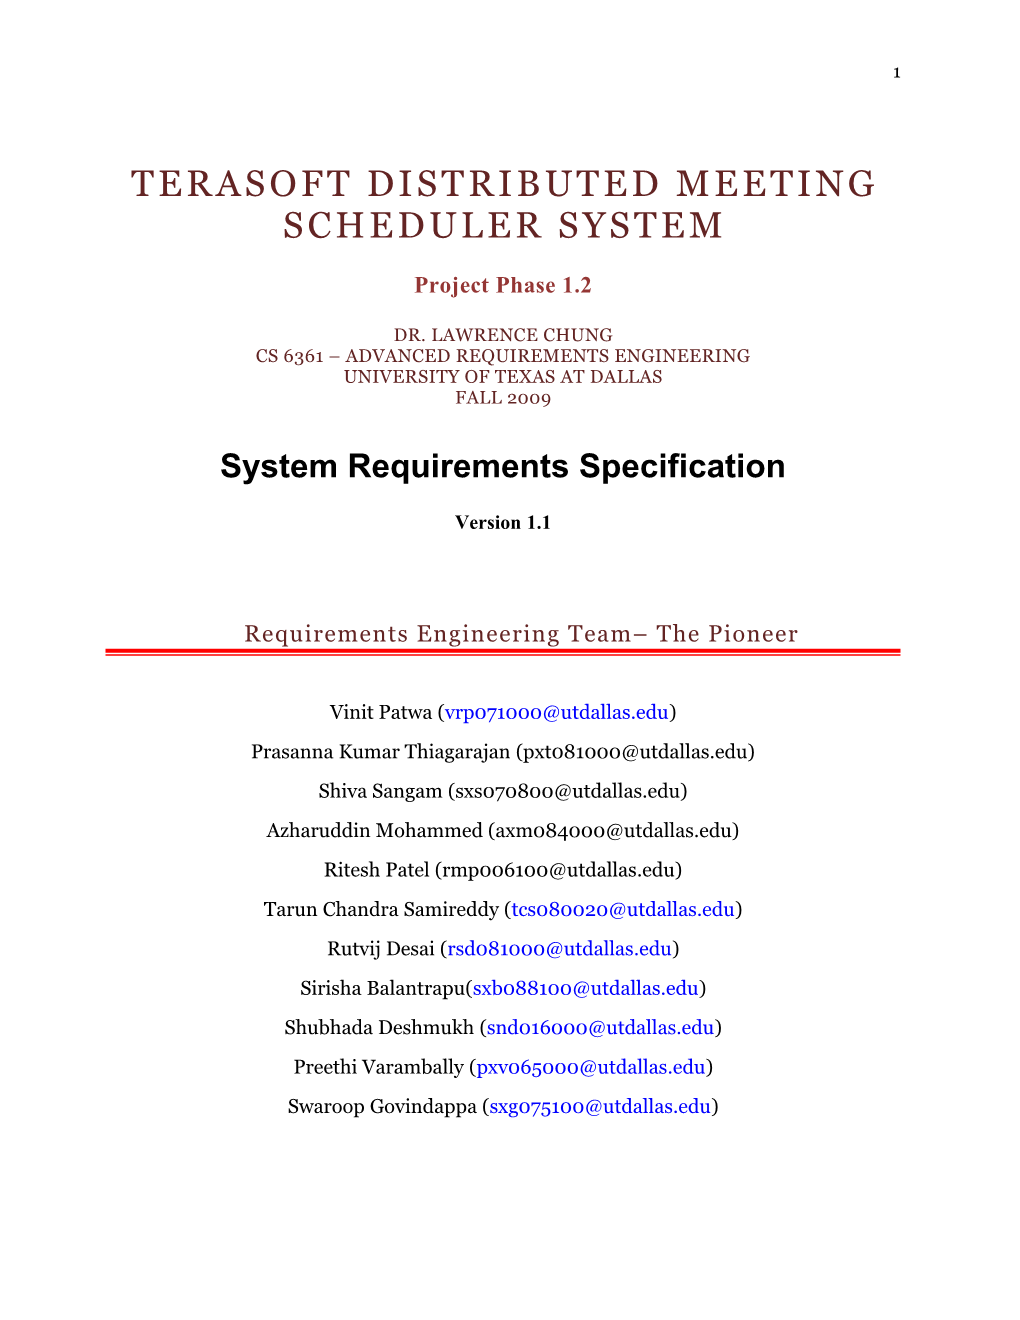 Terasoft Distributed Meeting Scheduler System